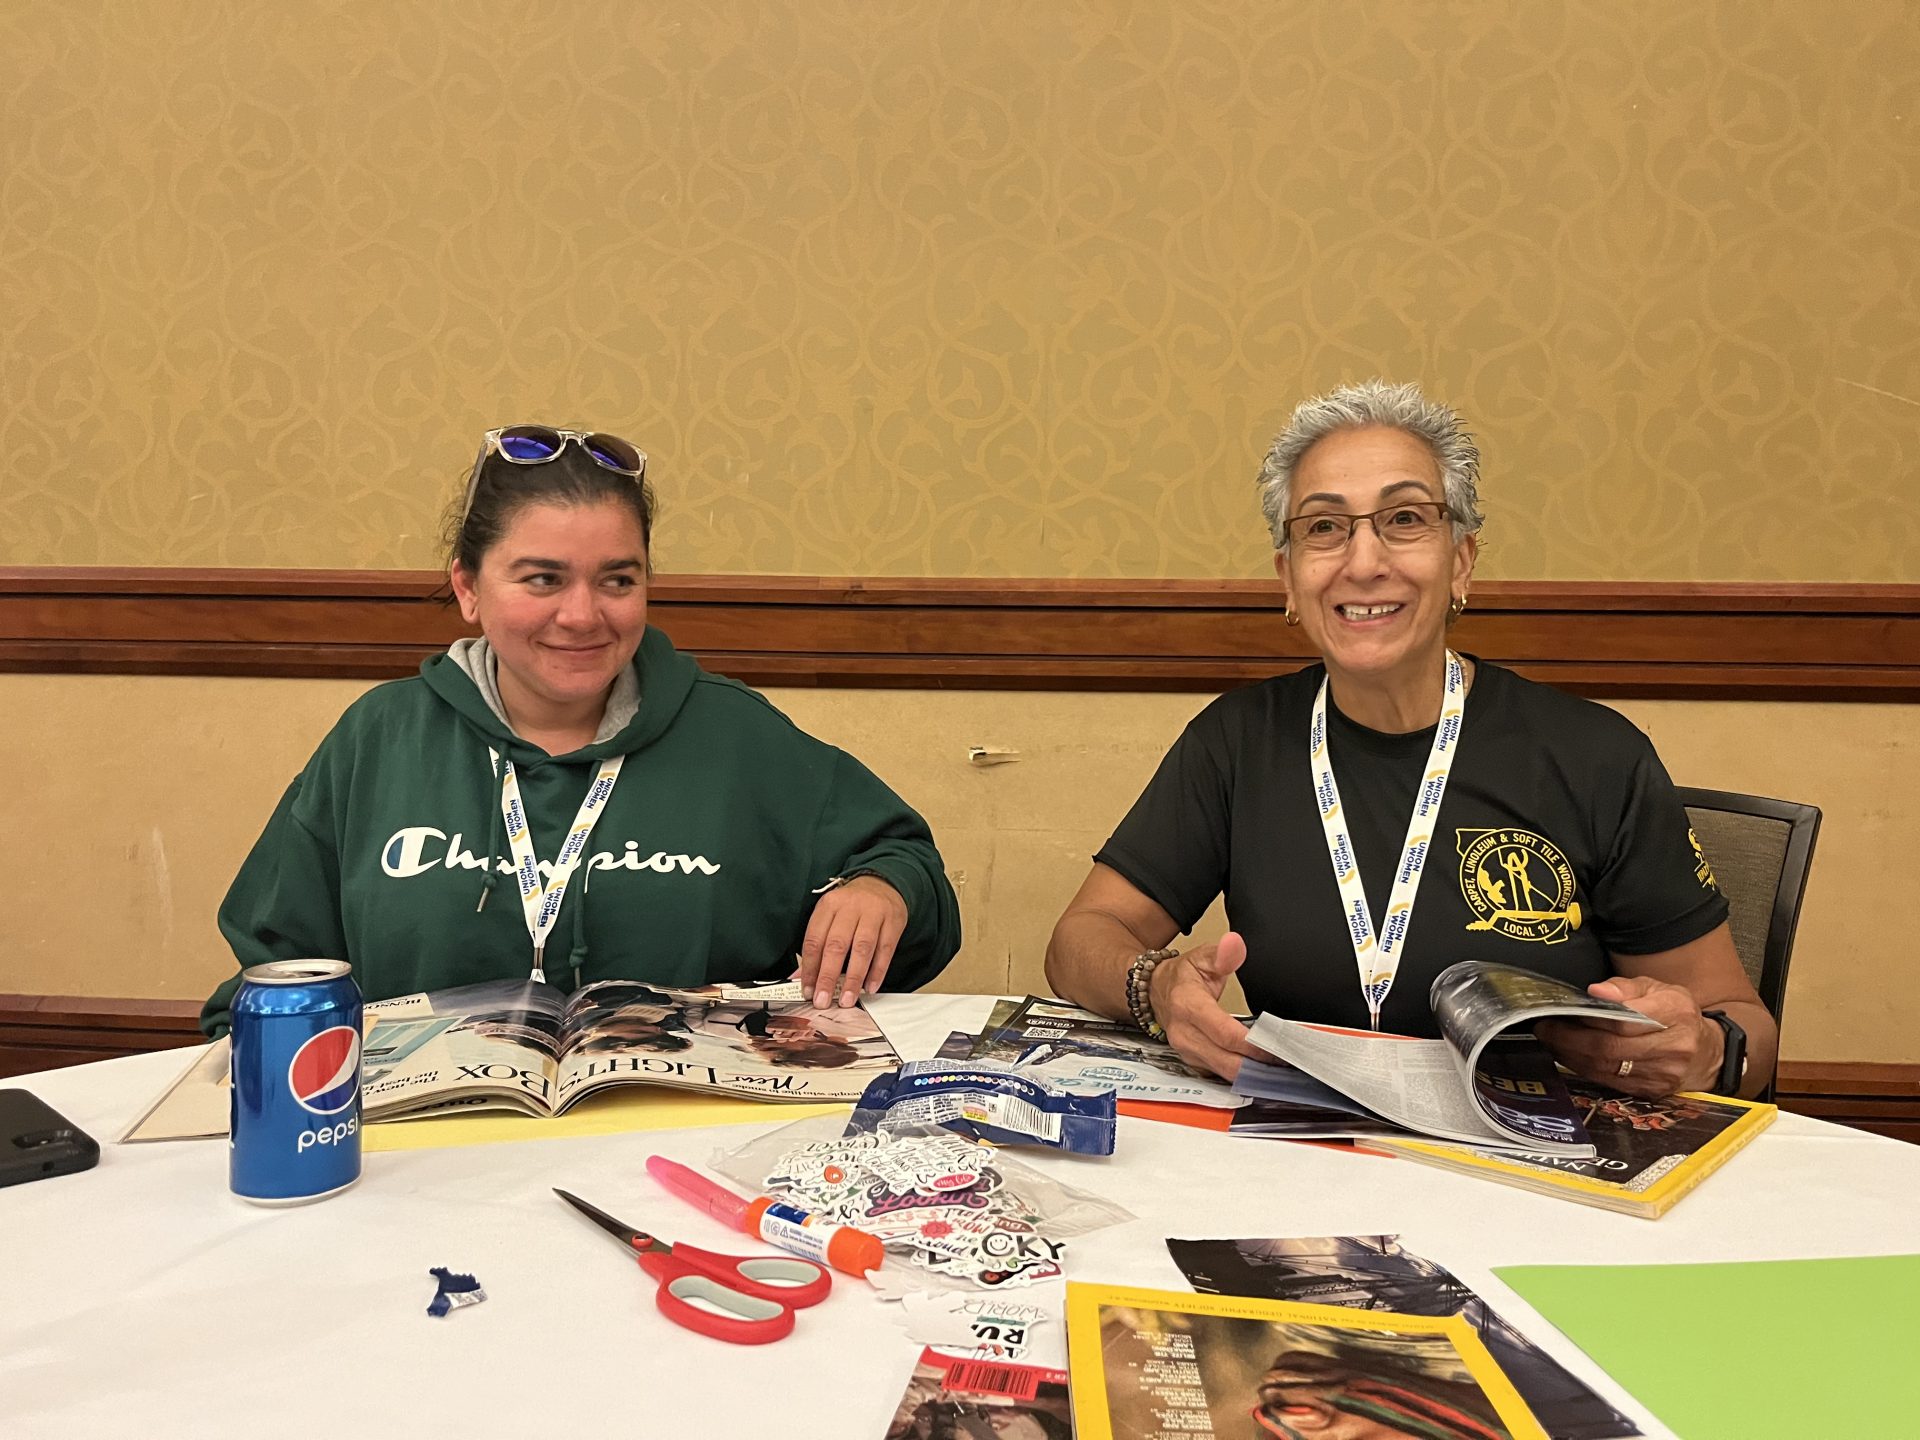 Image from the Gallery: Union Women CA Conference – Sacramento, CA